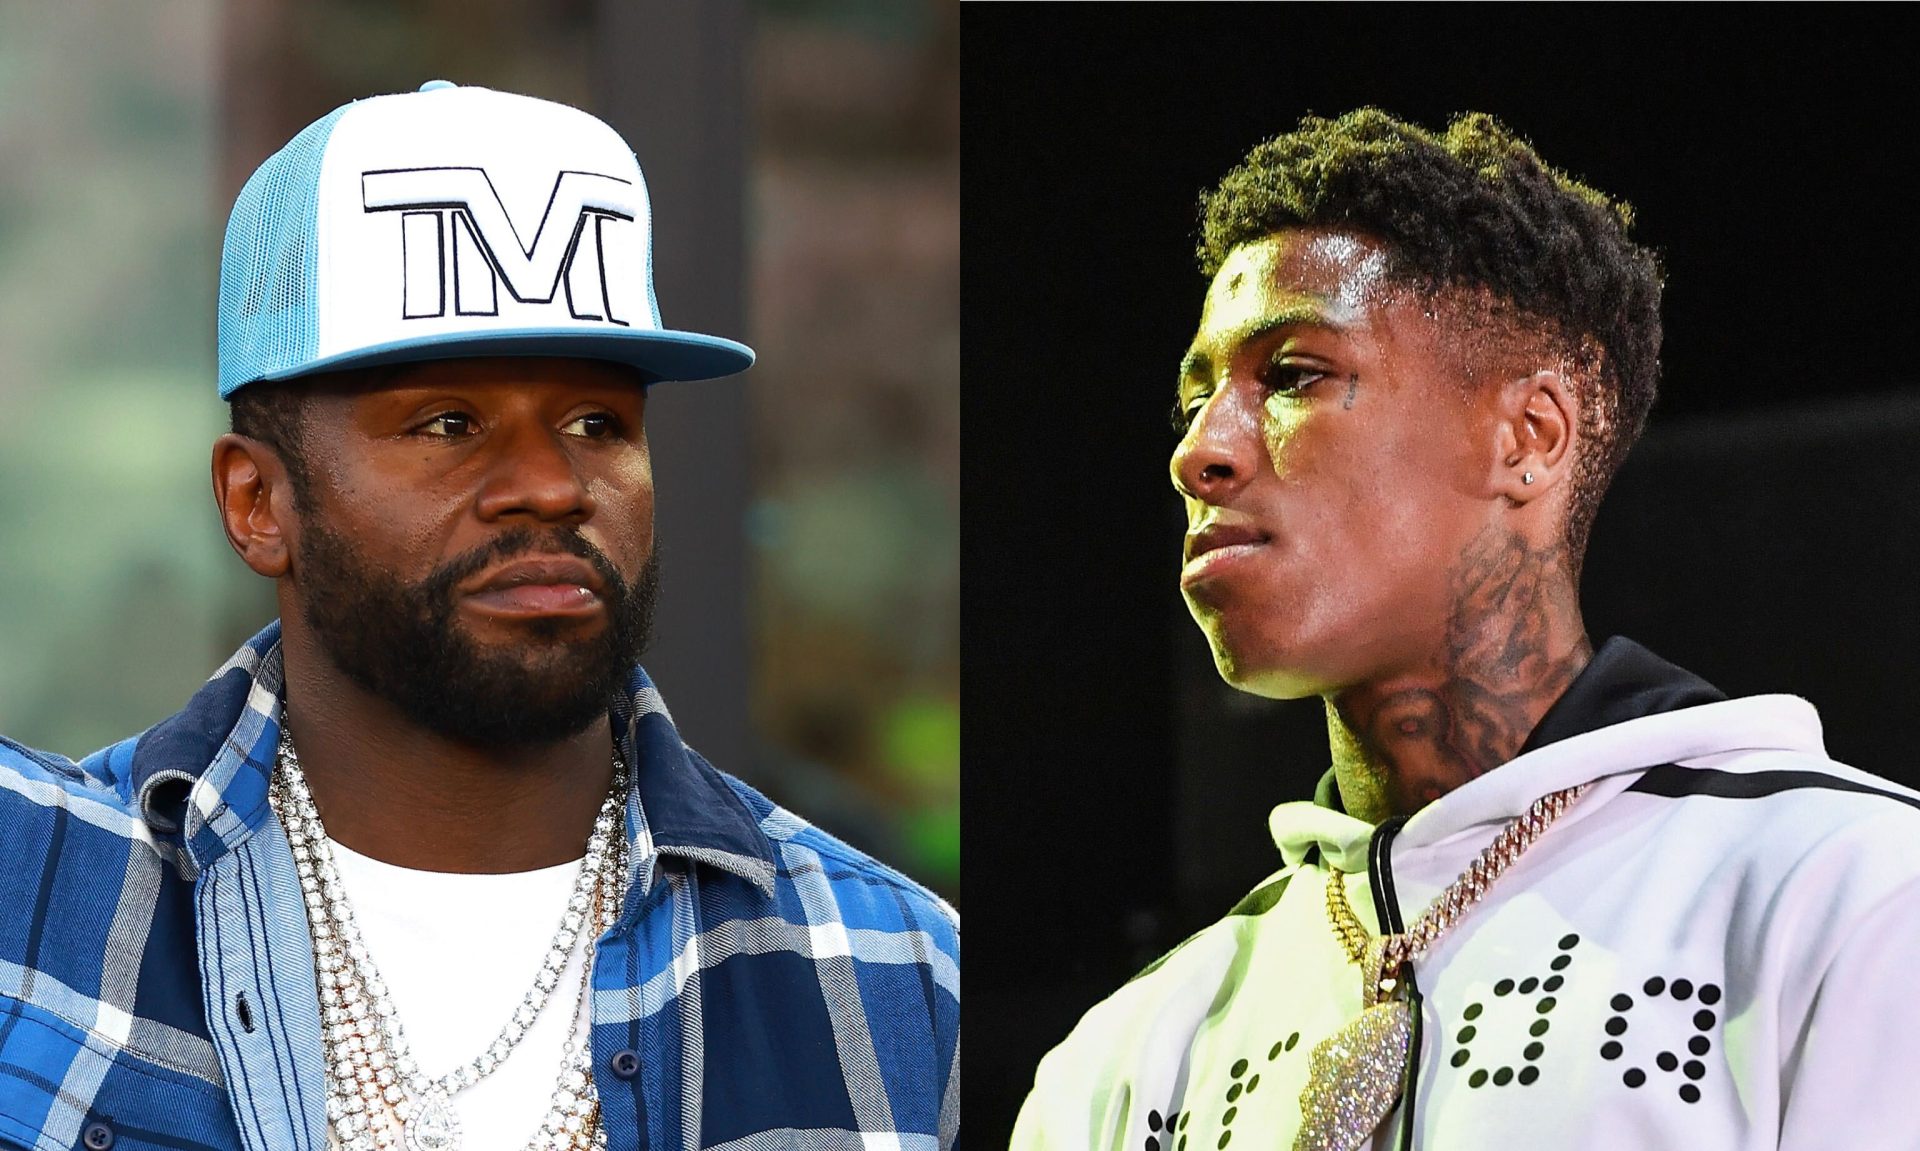 Floyd Mayweather Exhibits Cash “On Its Means” To NBA Youngboy